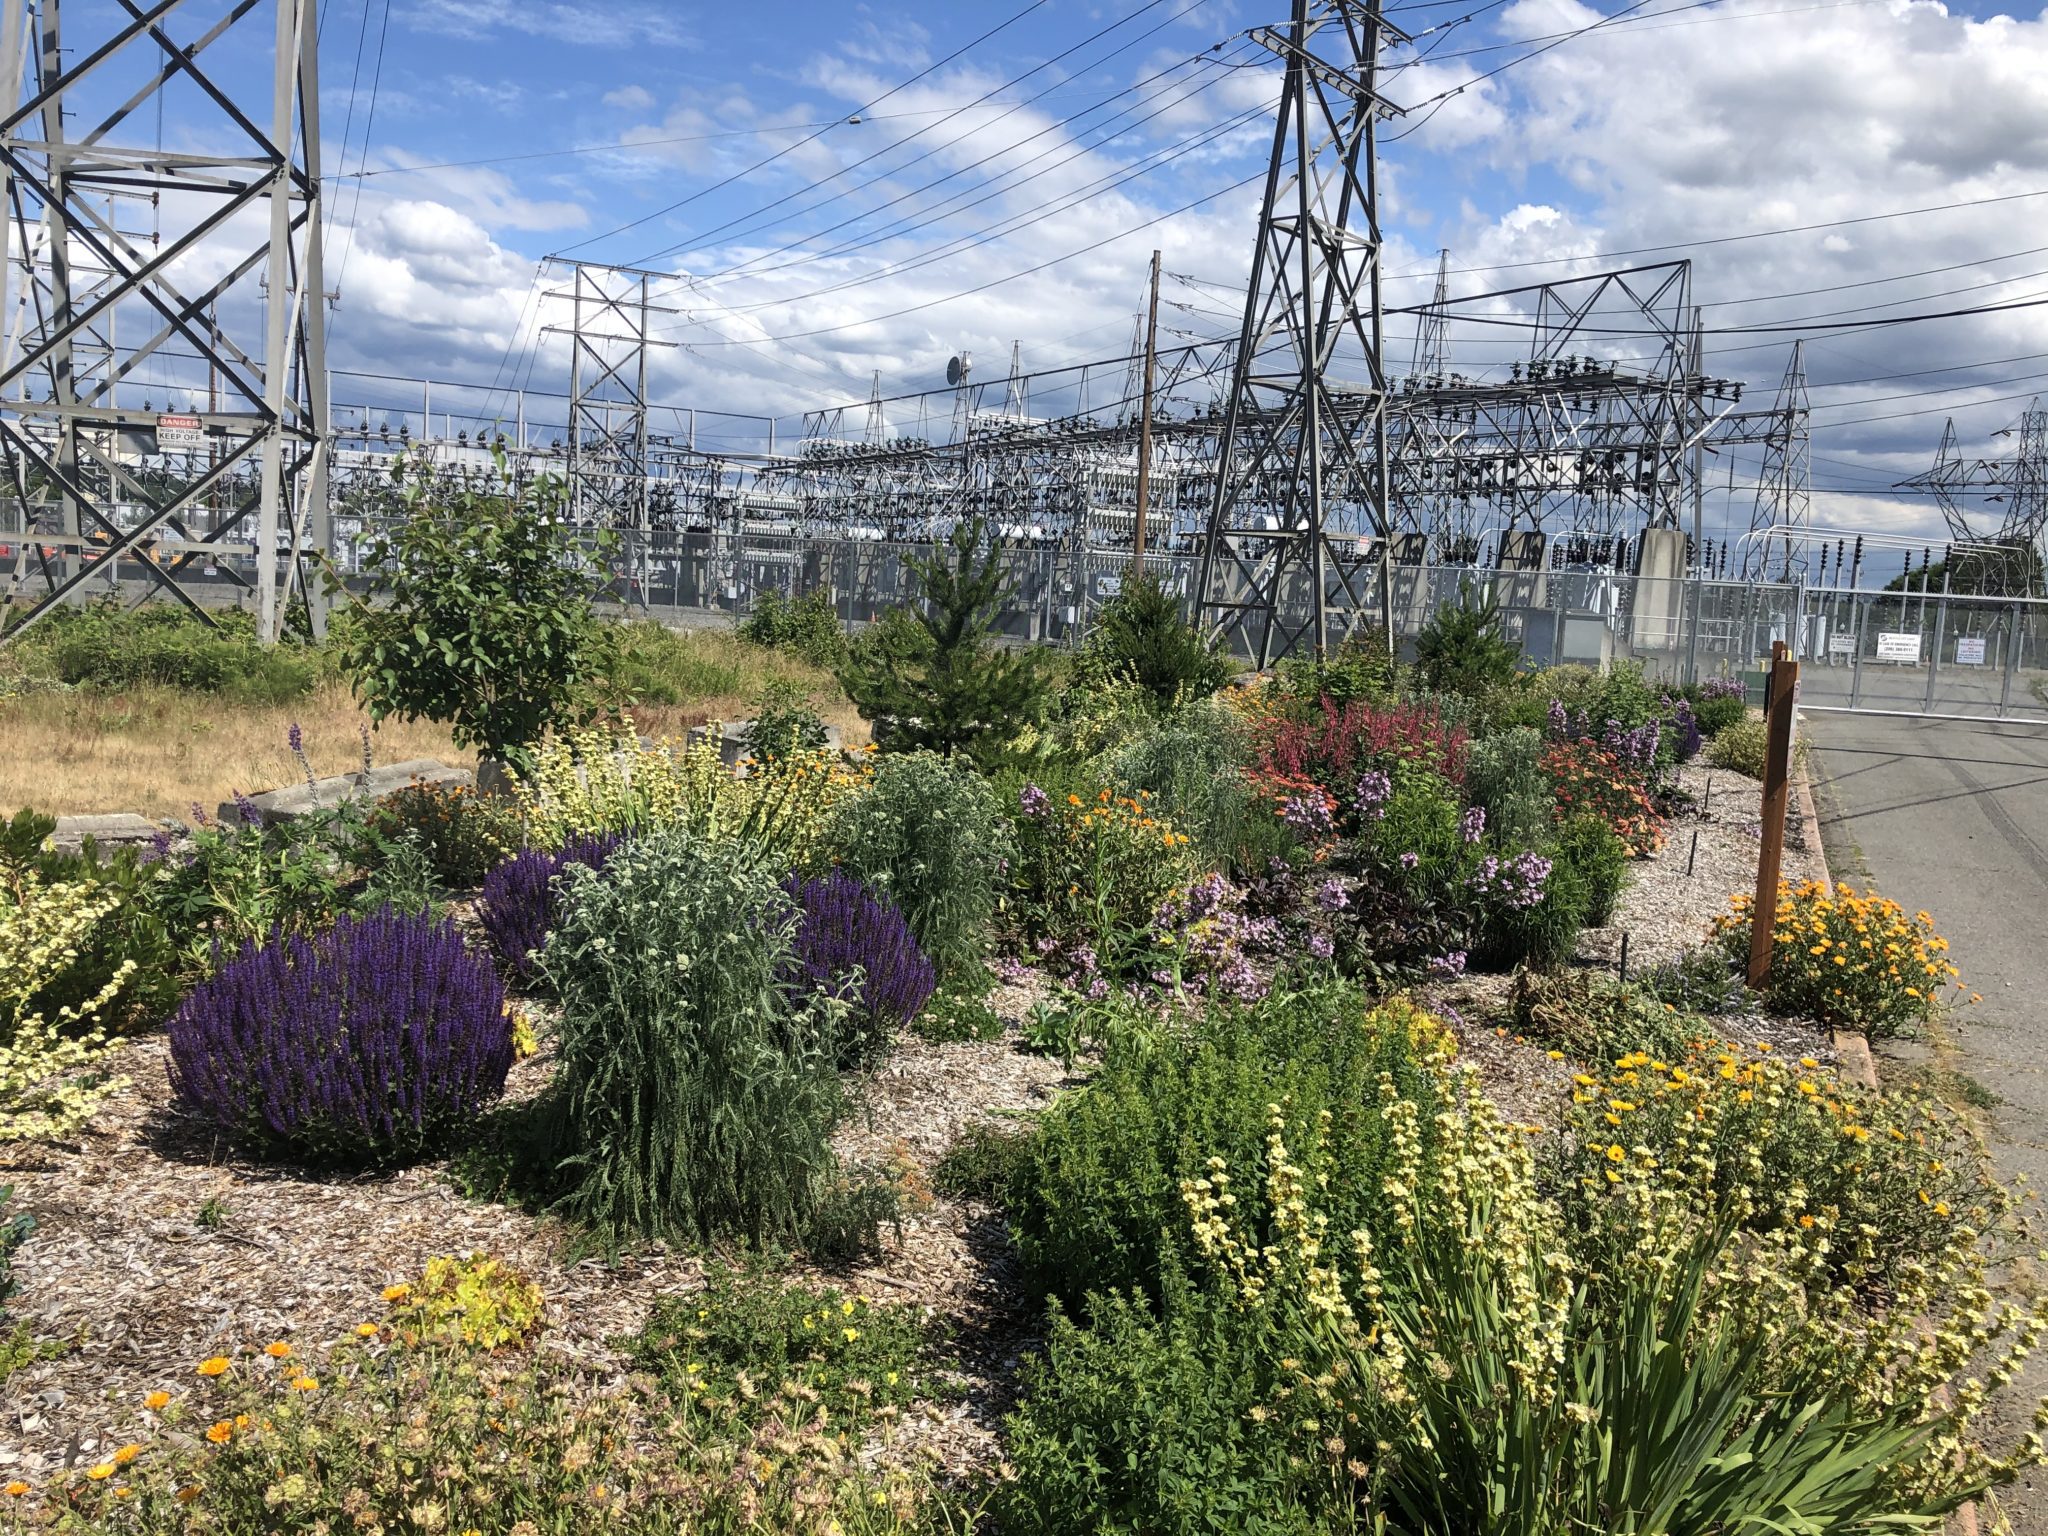 Duwamish Substation grounds planted with green, yellow and purple plants and shrubs